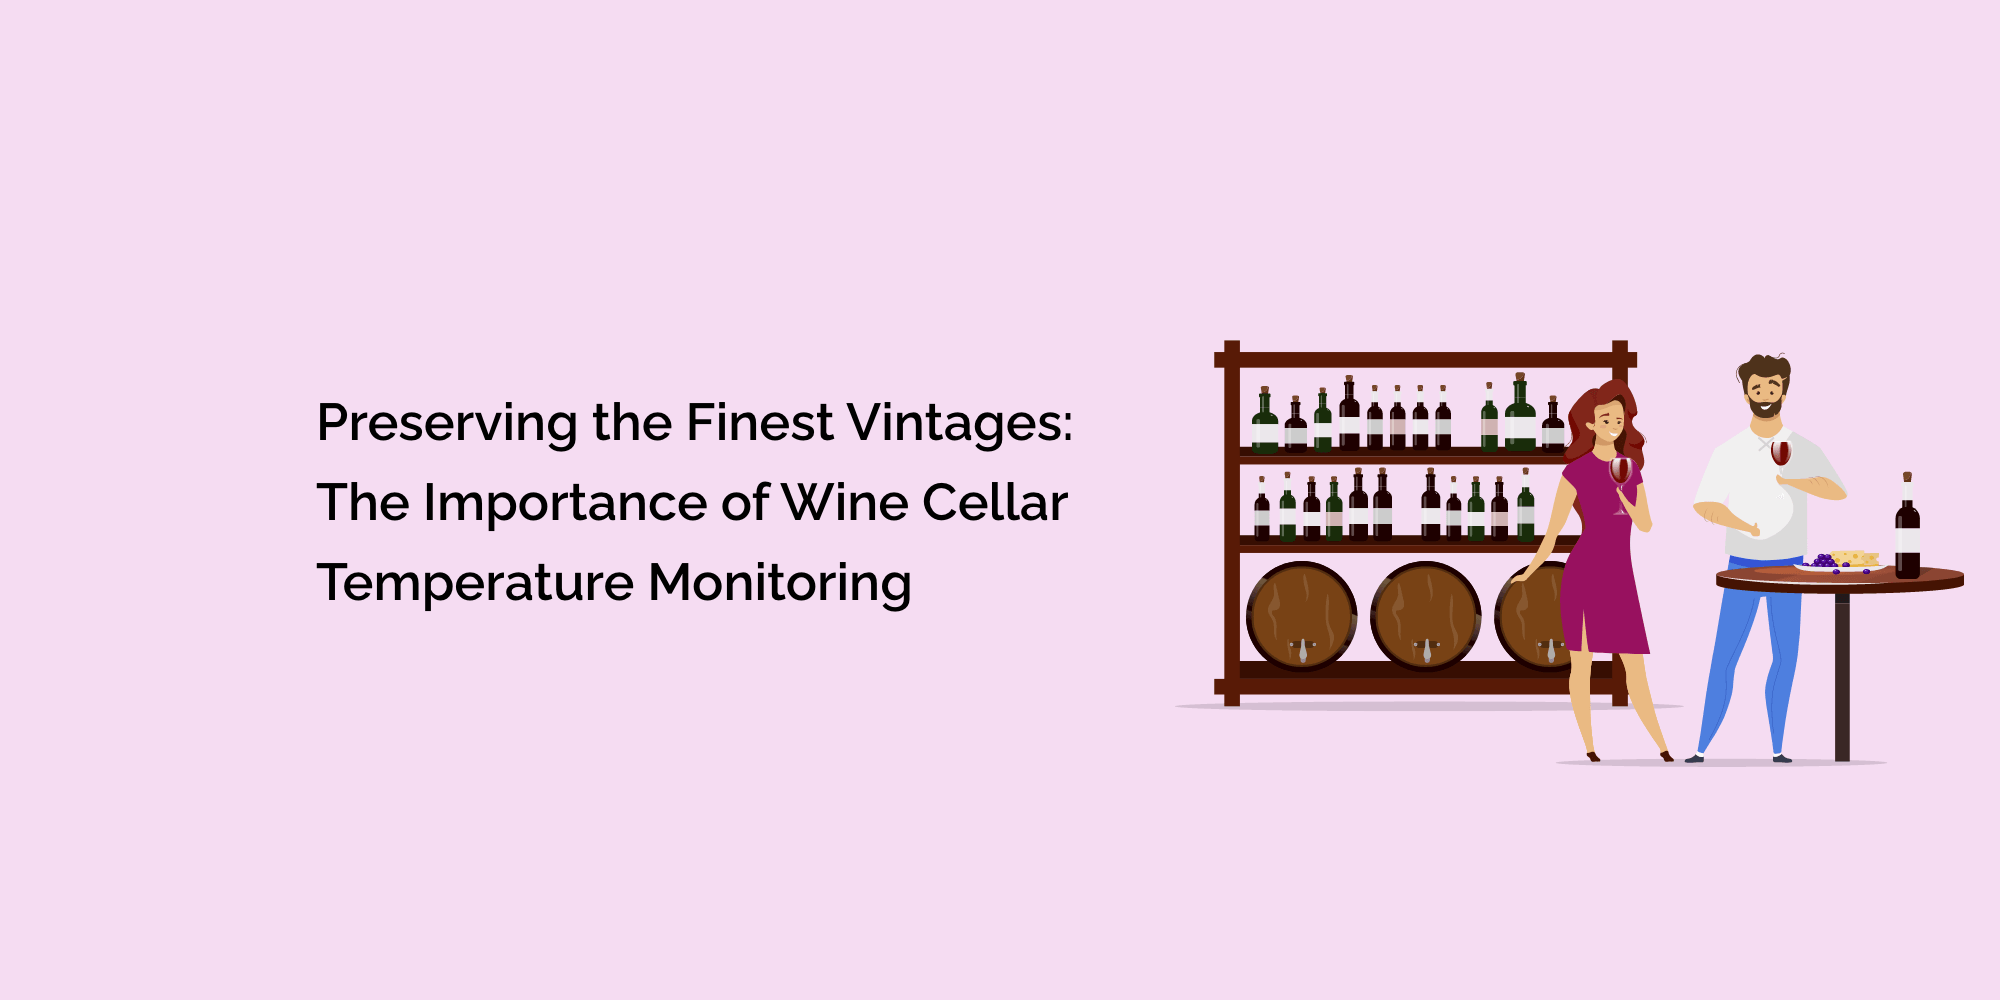 Preserving the Finest Vintages: The Importance of Wine Cellar Temperature Monitoring